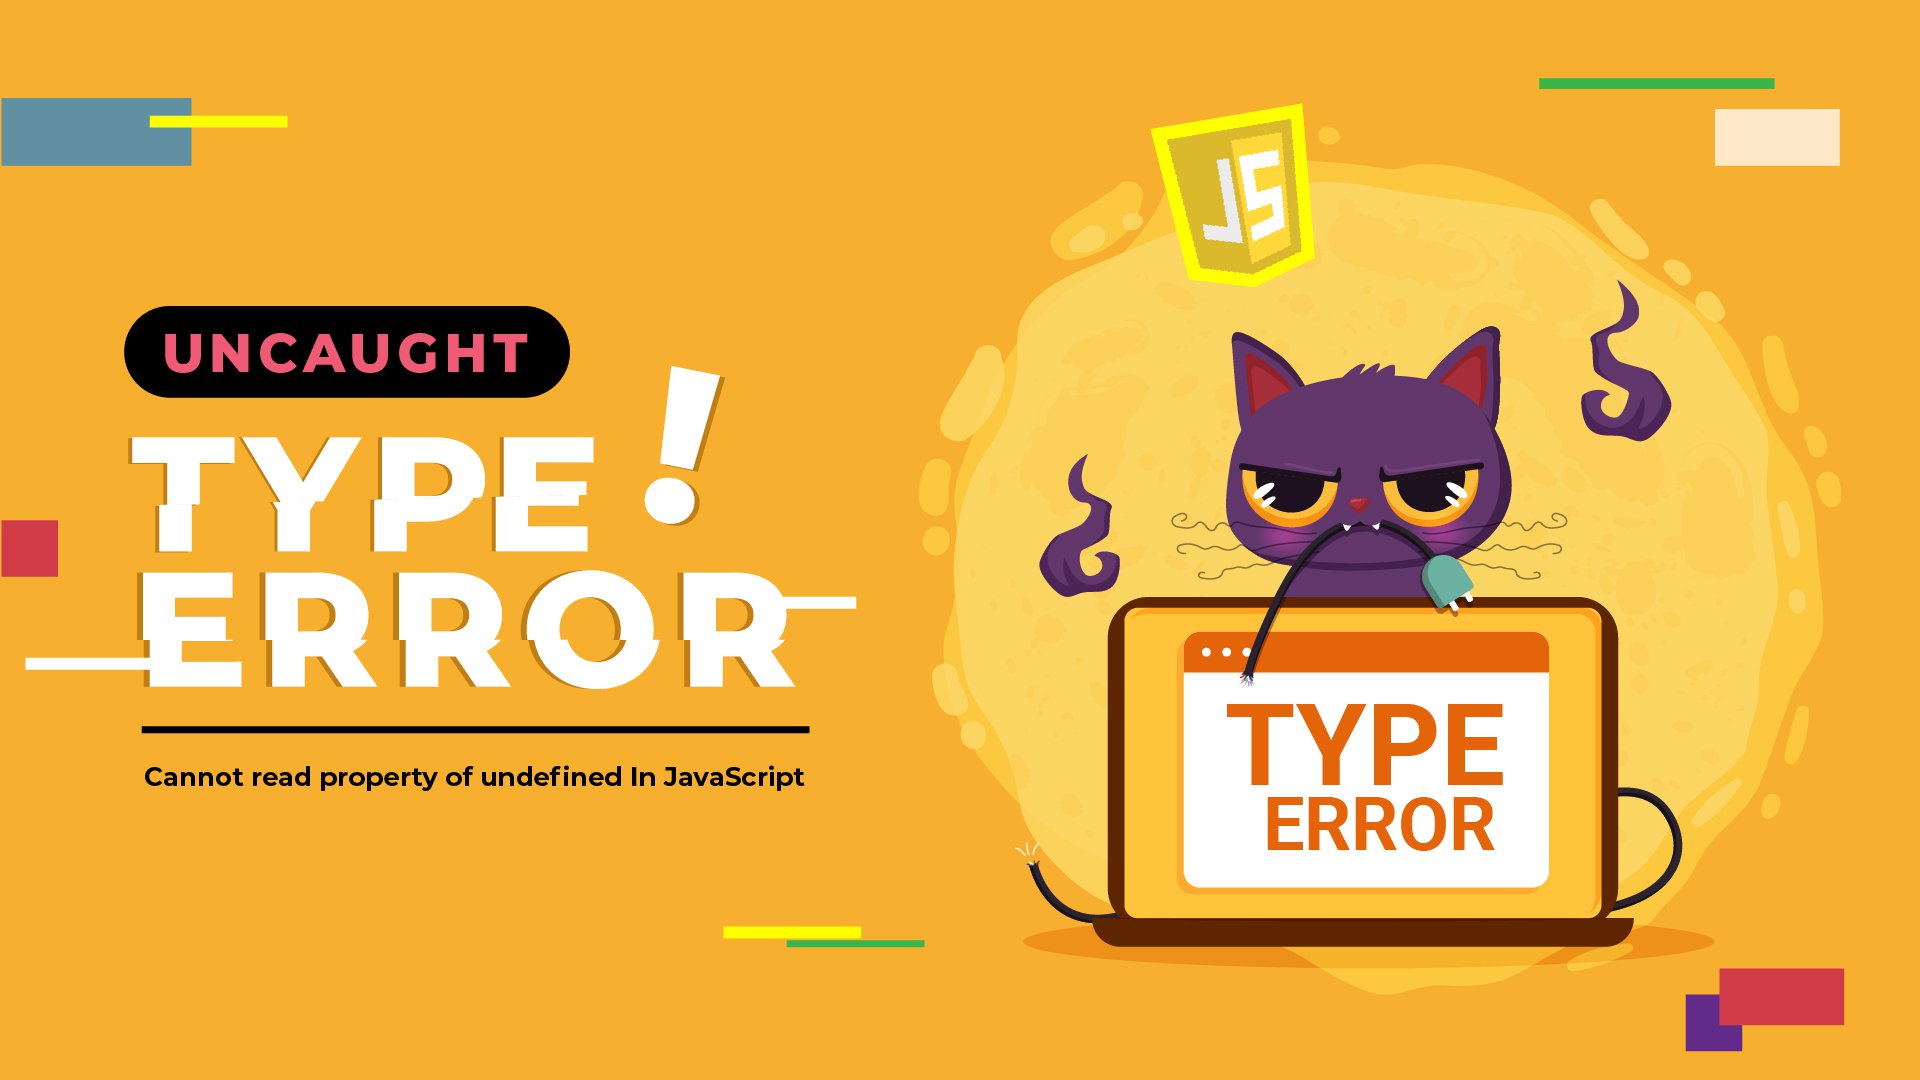 Uncaught TypeError: Cannot Read Property of Undefined in JavaScript